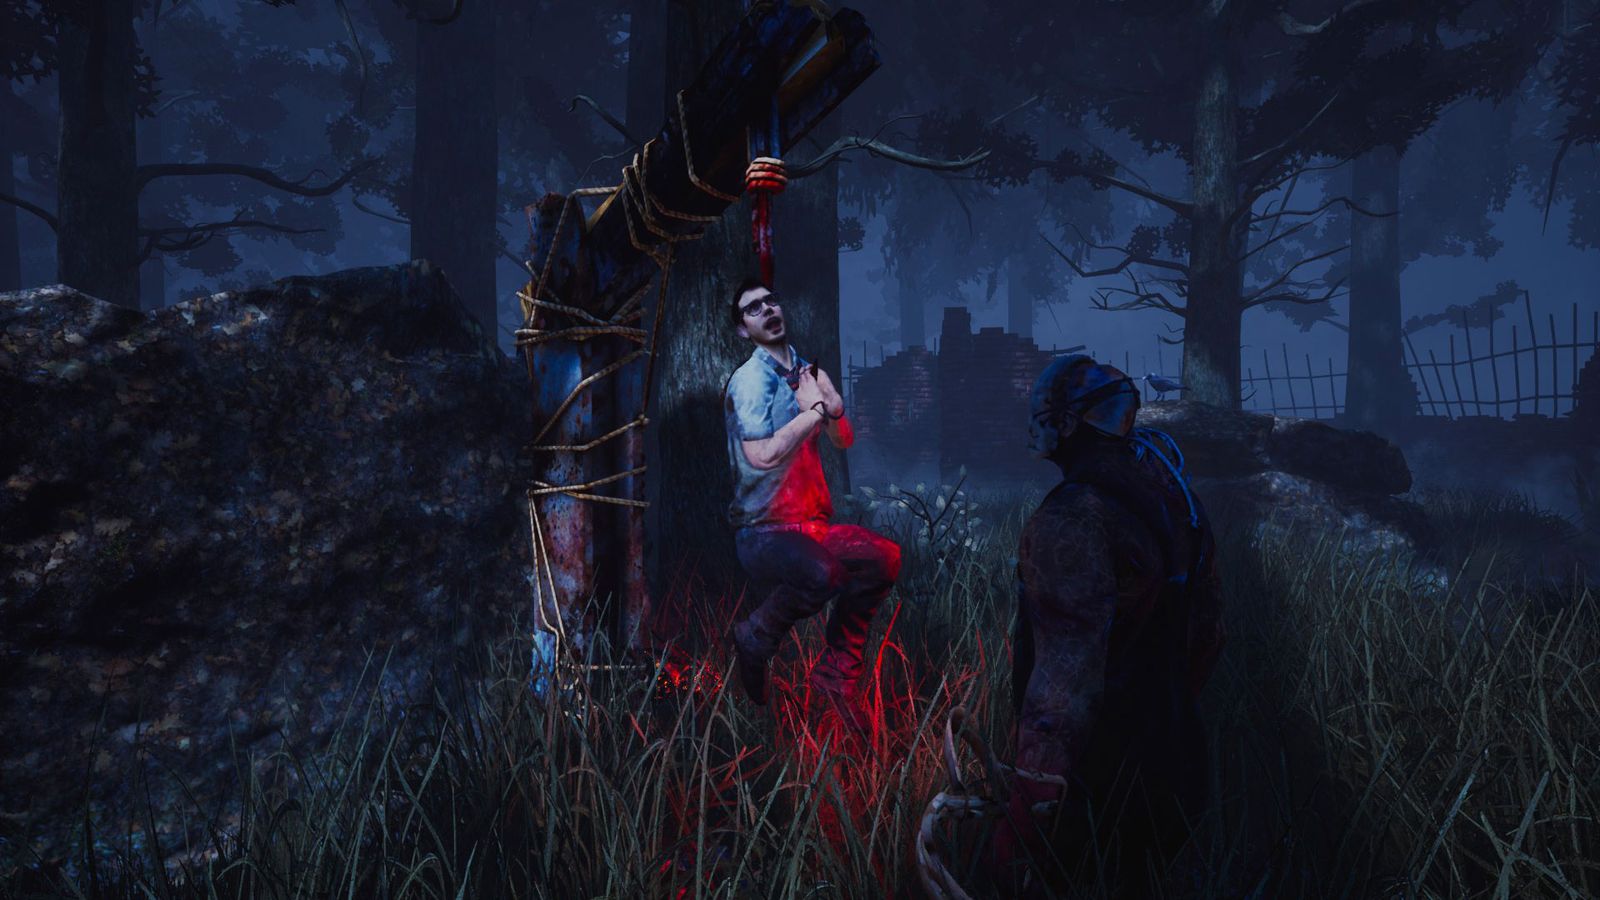 Strategic survivor builds can help when hooked in Dead By Daylight